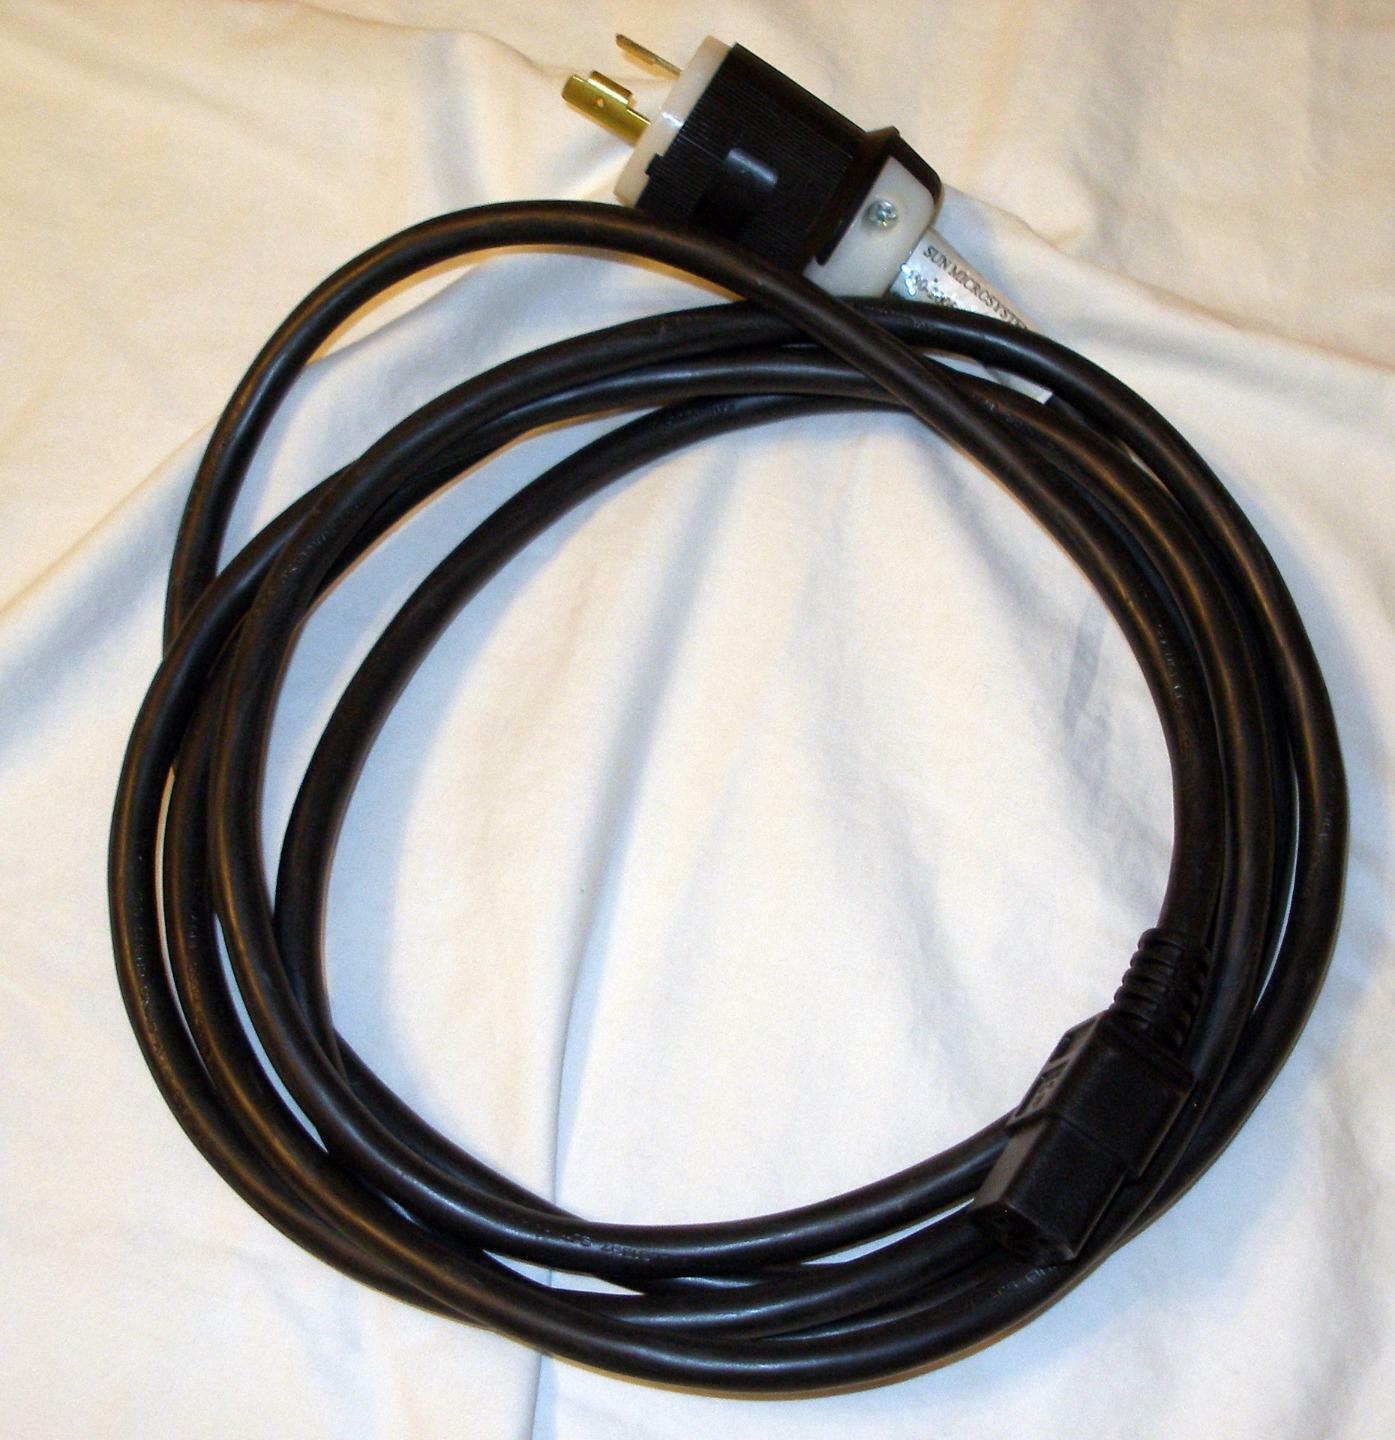 Power Cable  208-240 VAC 20 Amp – L6-20 to C19  Sun Microsystems Part # 180-2005